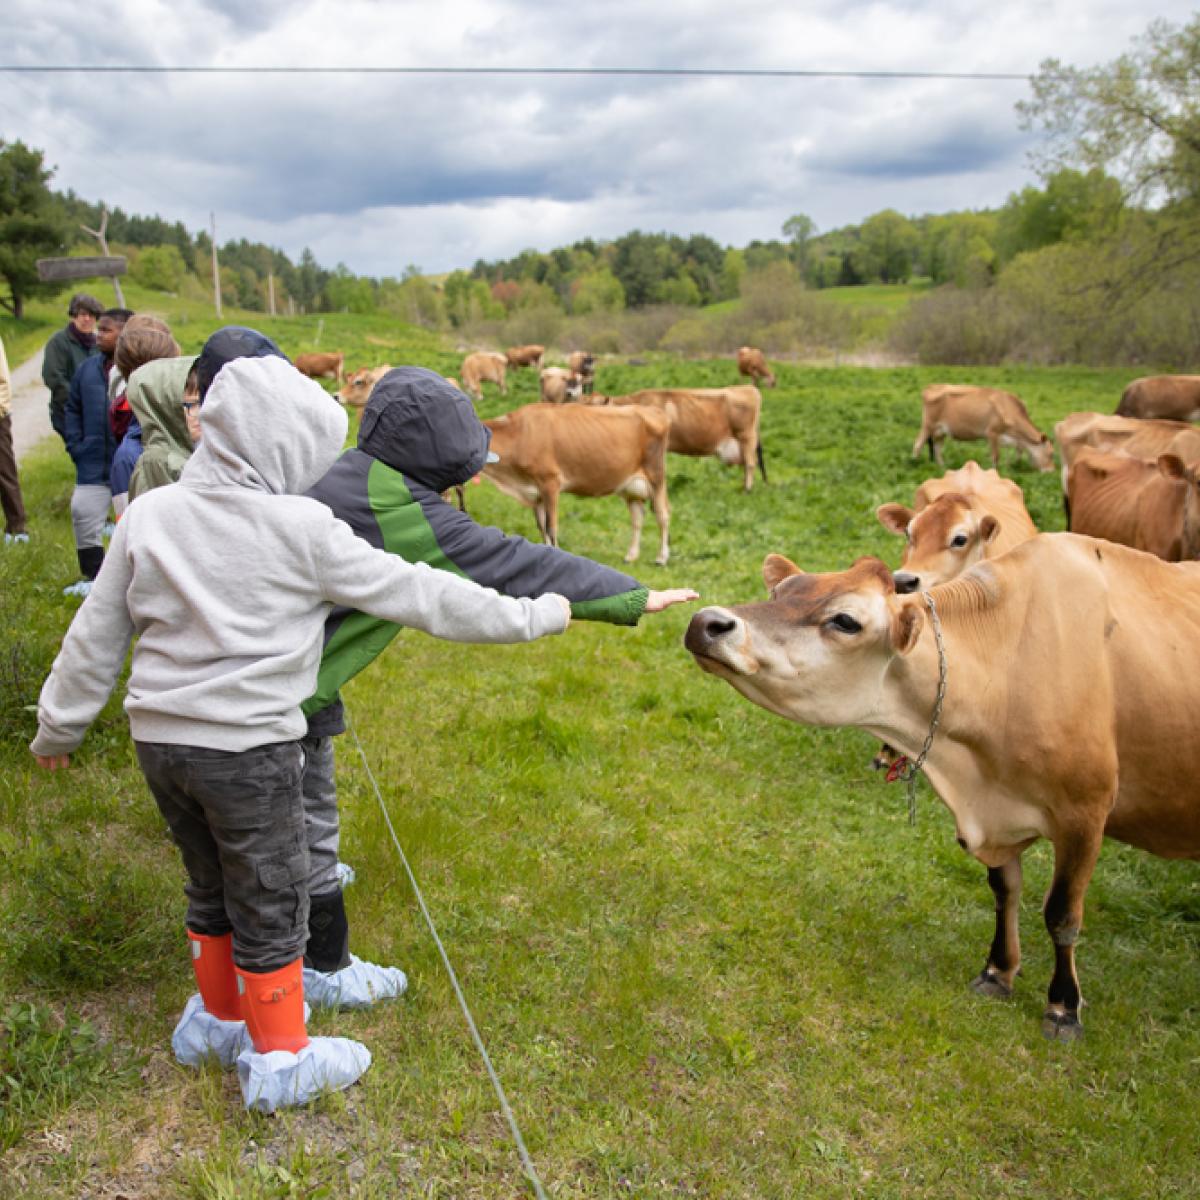 Students reach out to touch a cow in pasture.